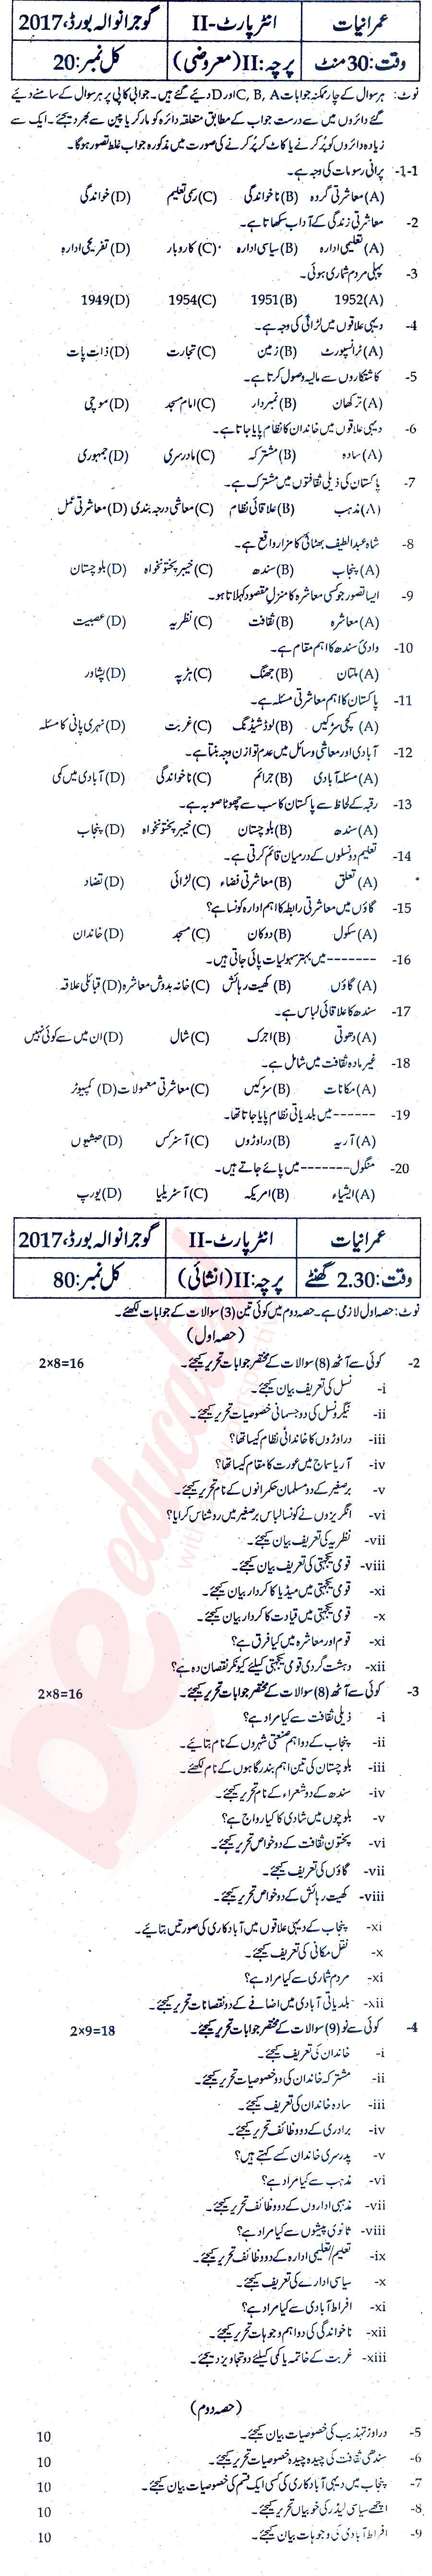 Sociology FA Part 2 Past Paper Group 1 BISE Gujranwala 2017